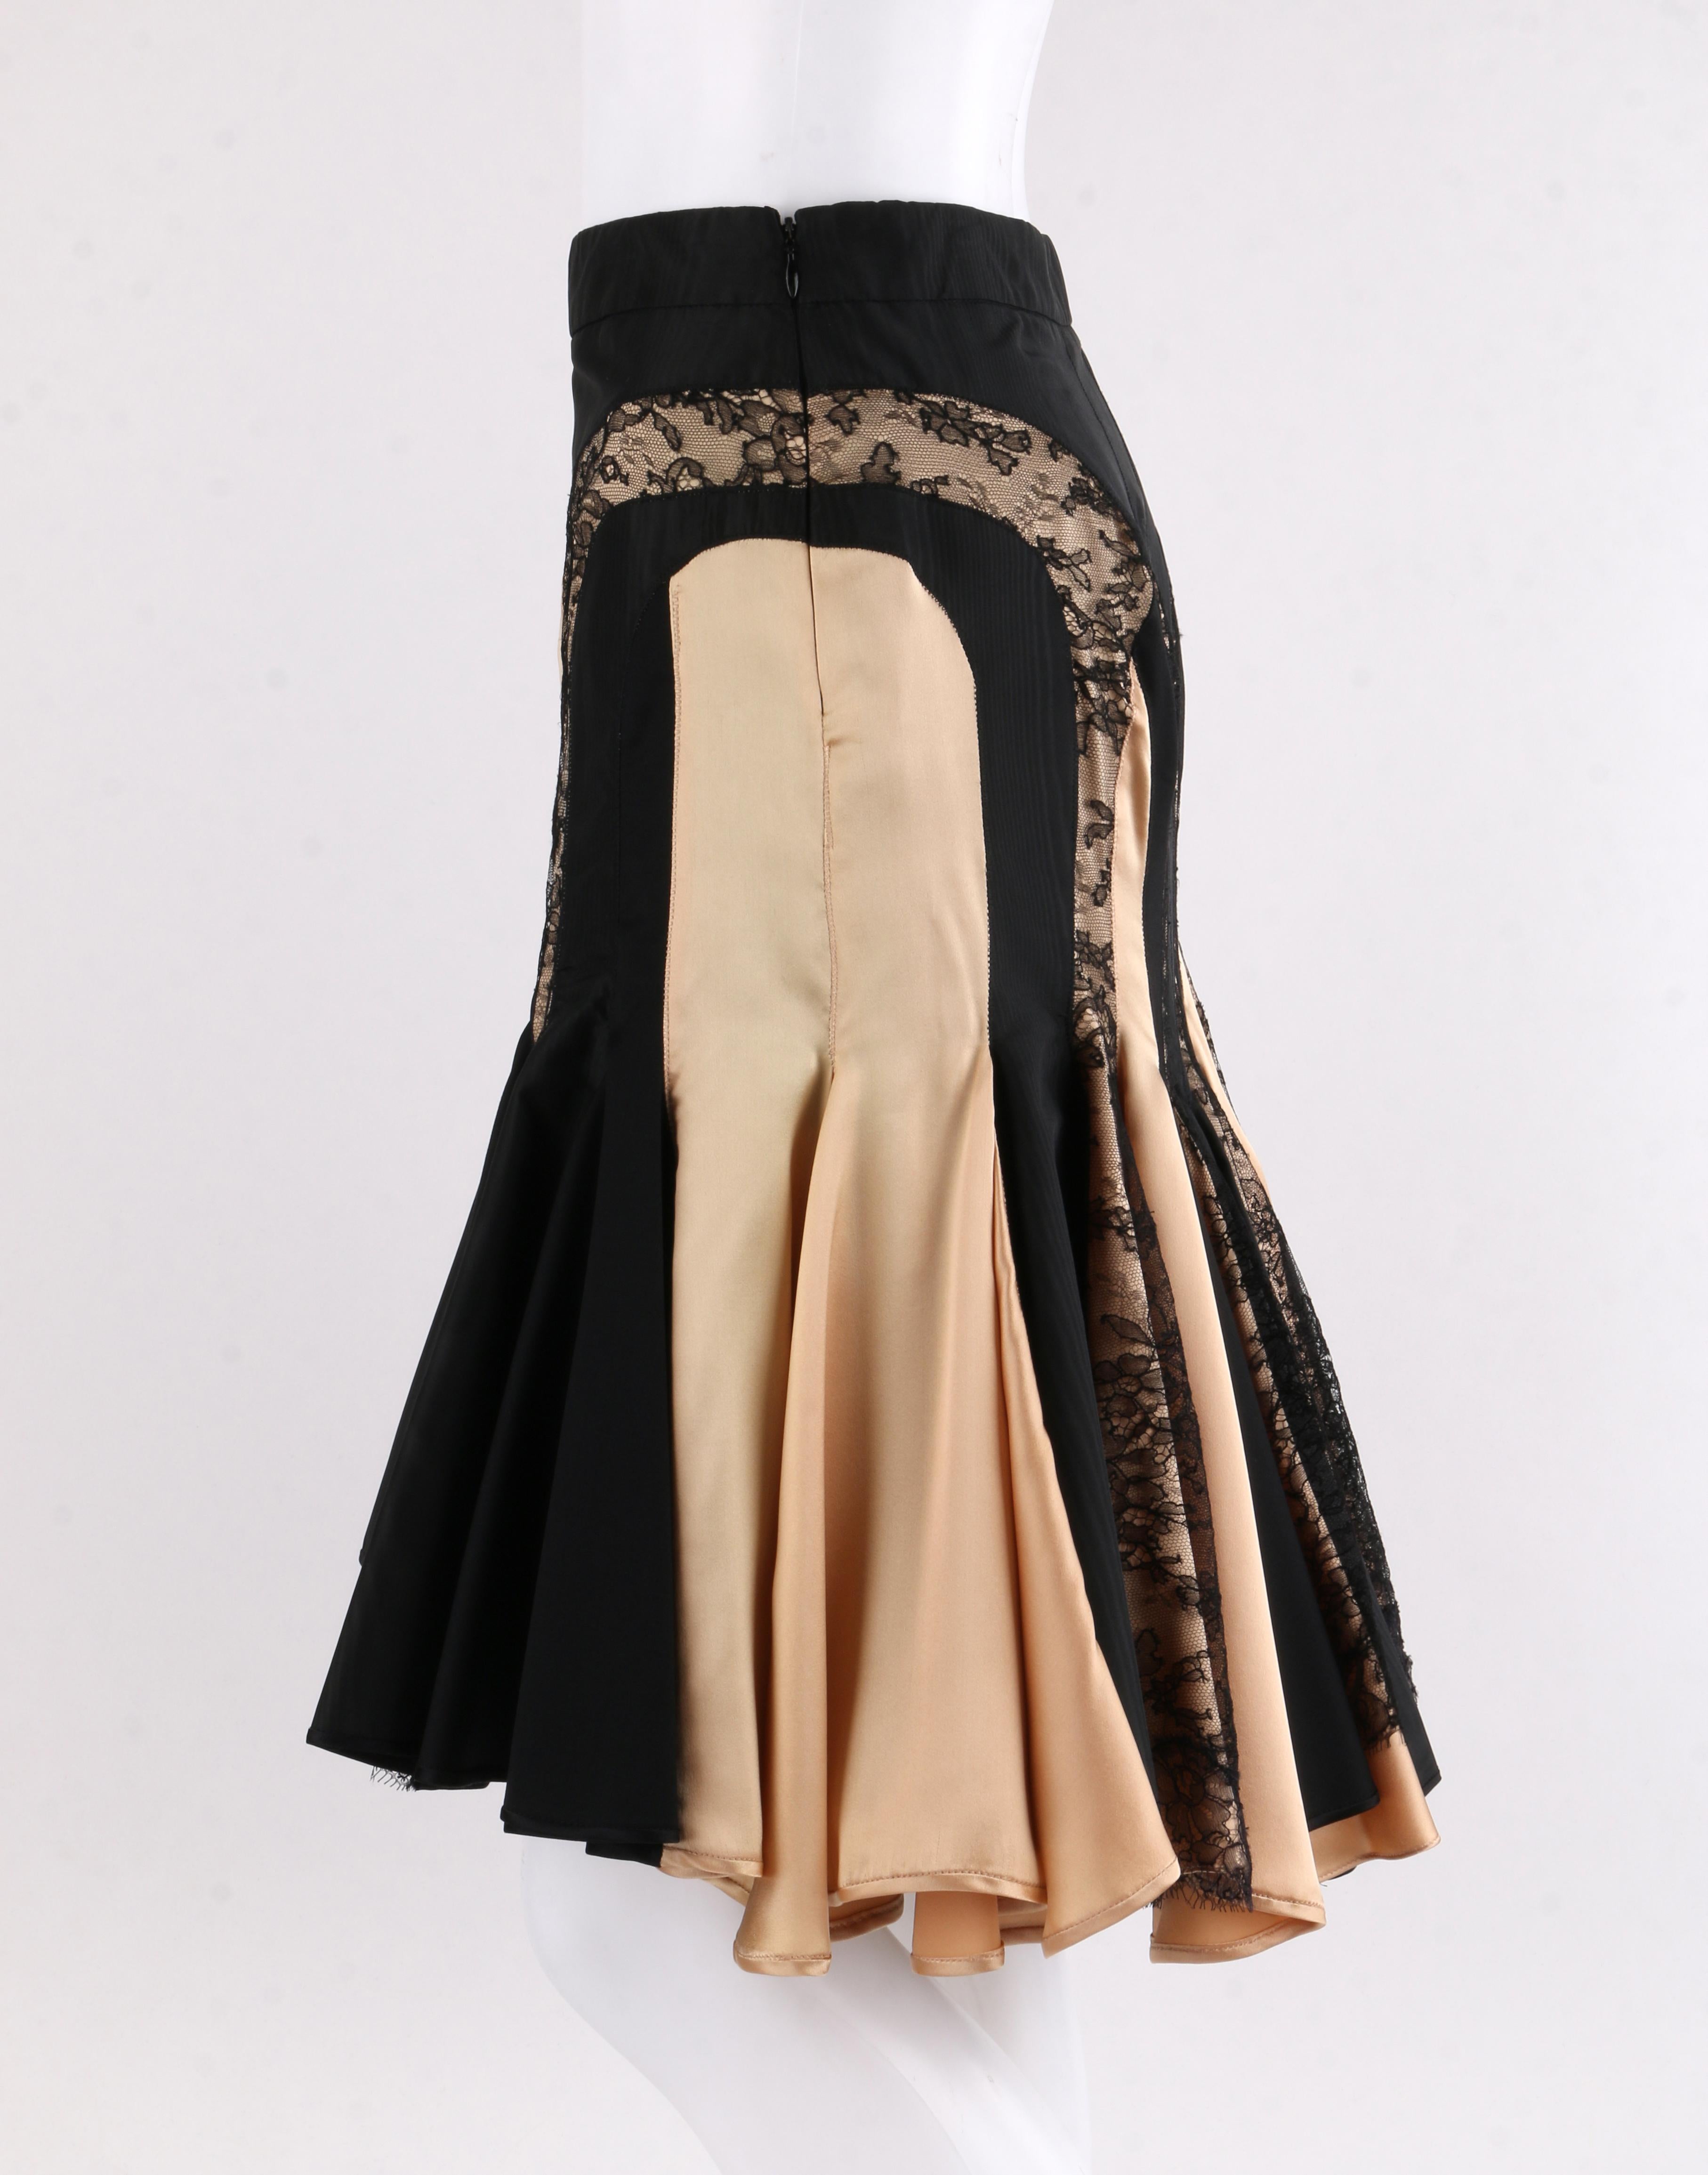 ALEXANDER McQUEEN S/S 2004 Black Champagne Lace Flared High Low Trumpet Skirt 1